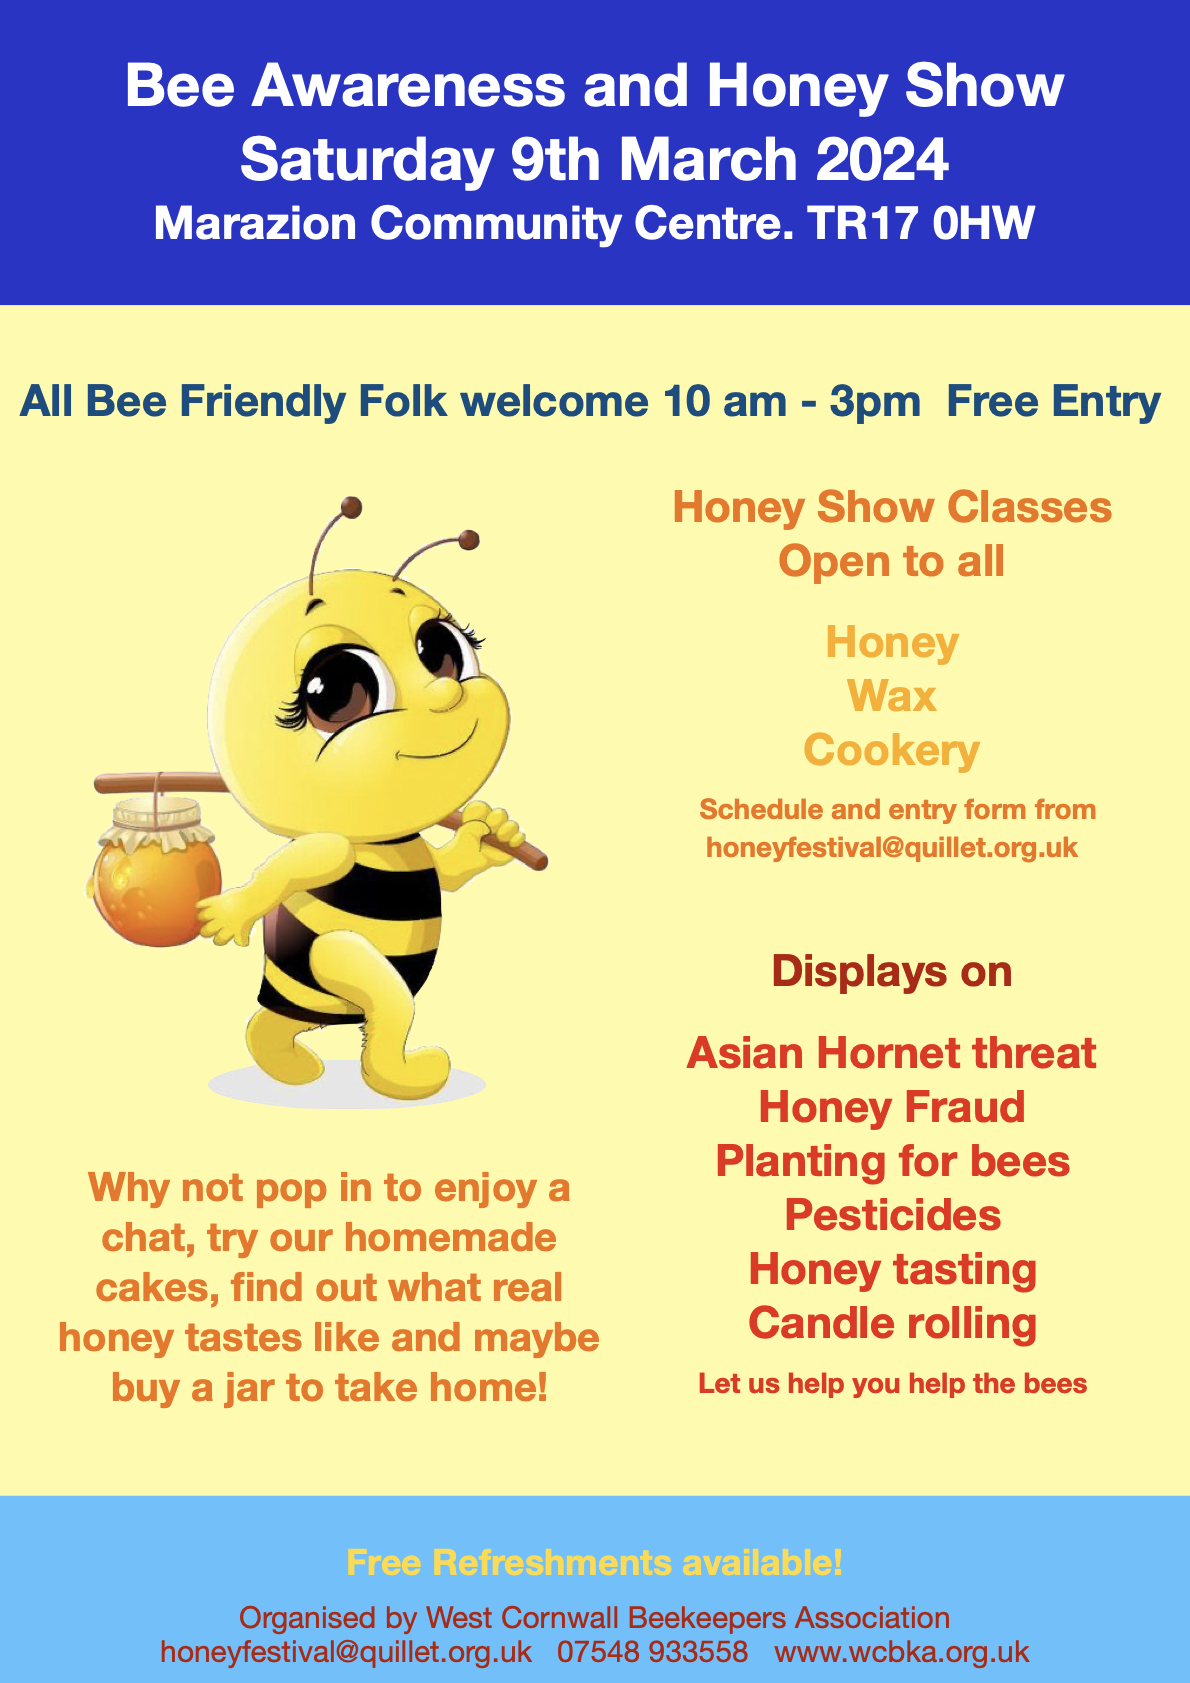 Bee awareness day and honey show